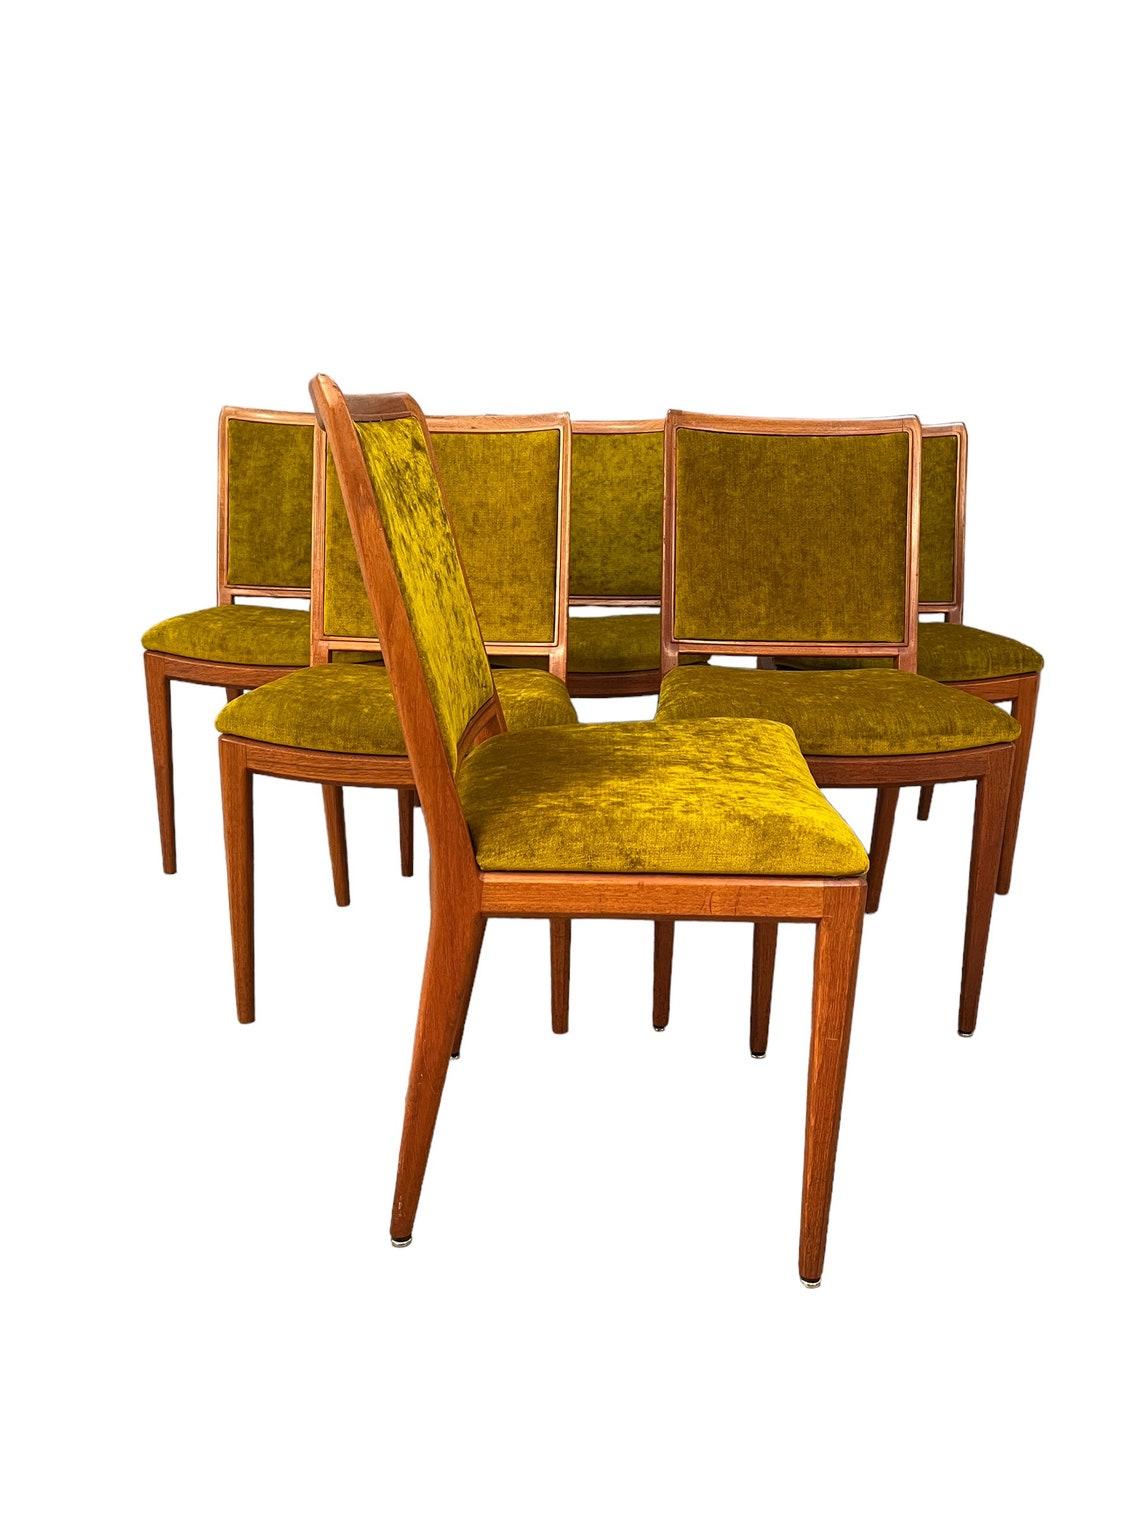 Curated Mid-Century danish teak dining chairs set of 6 1960’s with brand new Upholstery green velvet / gold.
comfy and sturdy like new. 
Dimensions: W19 1/2 X D17 x H34 1/2 inches 
Seat height: 18 inches